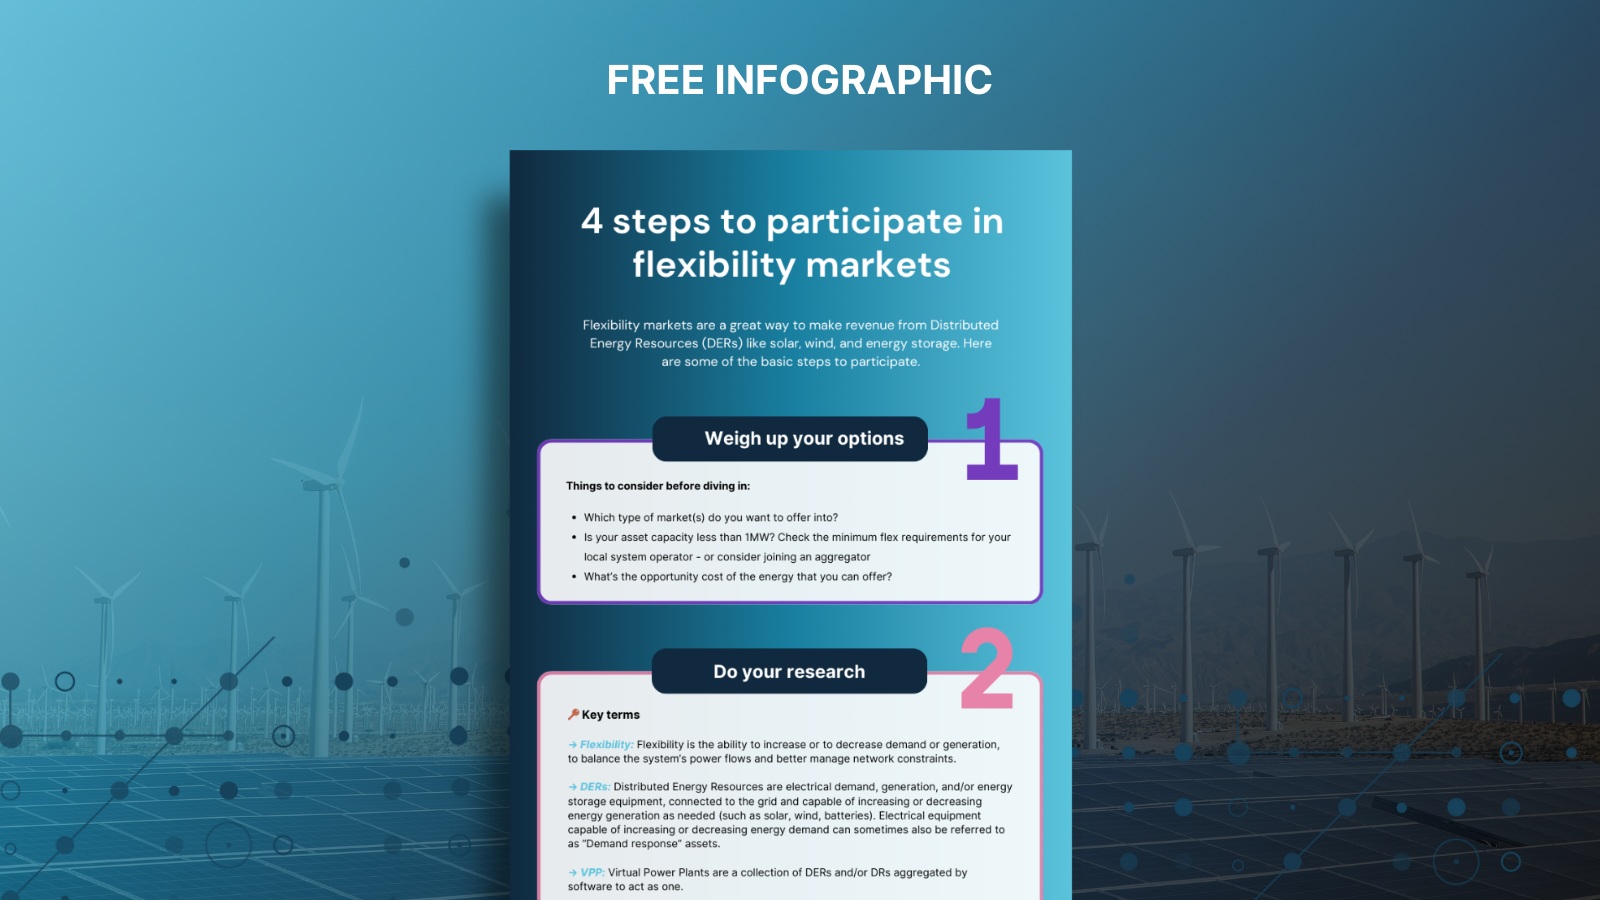 Infographic on how to participate in flex markets